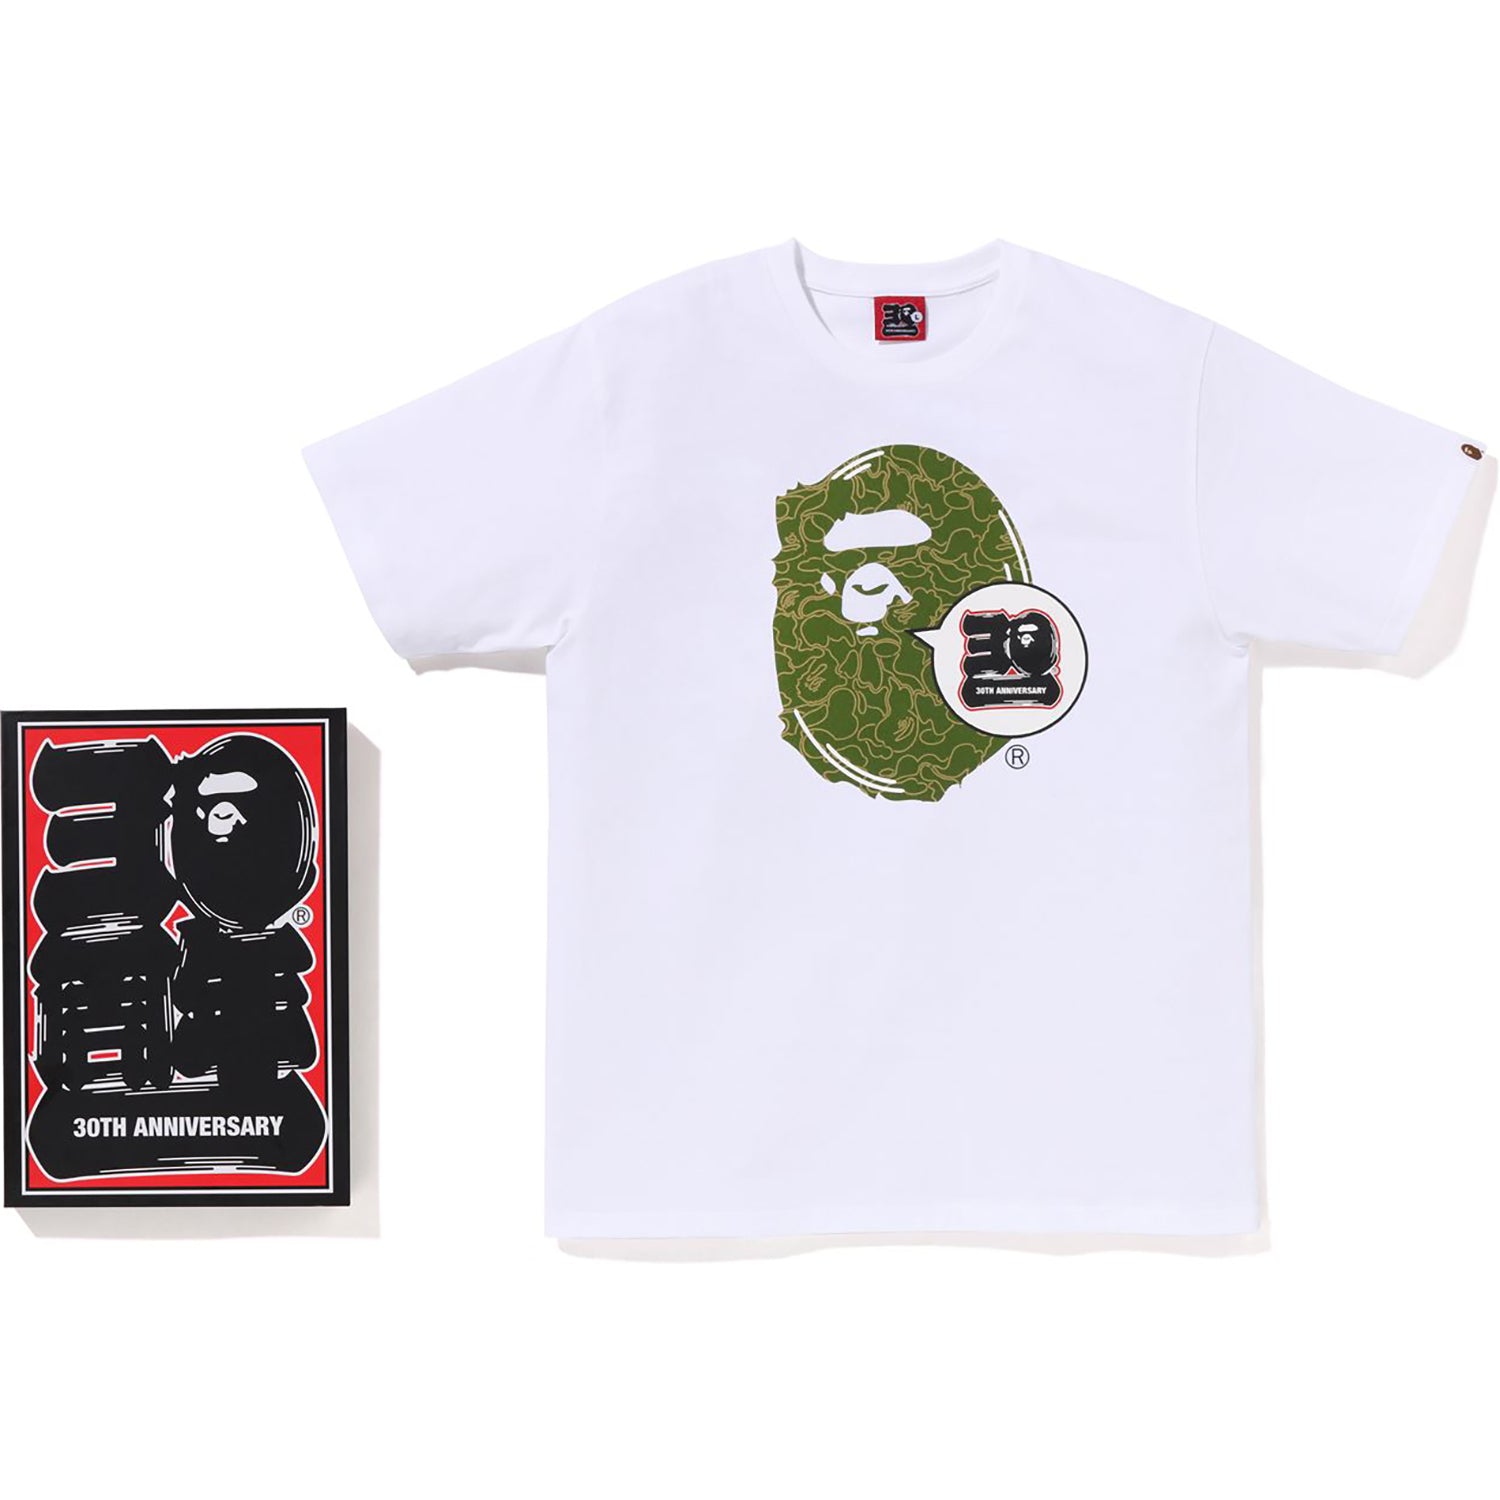 BAPE Archive Graphic #14 Tee Red